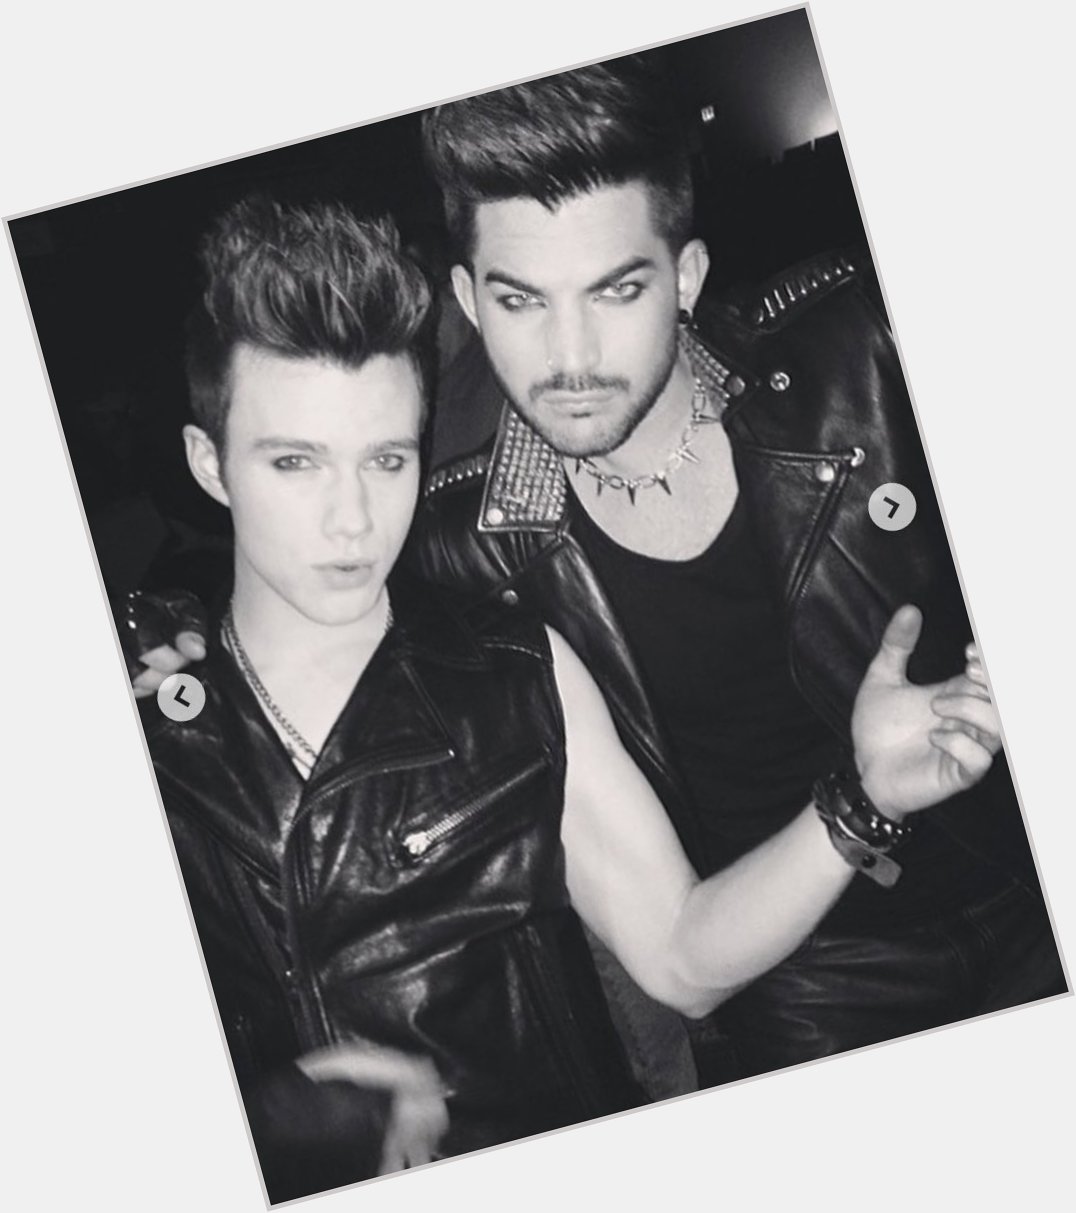 I wanted to wish a happy birthday to the talented King known as Adam Lambert! Hope it s a good one legend! 